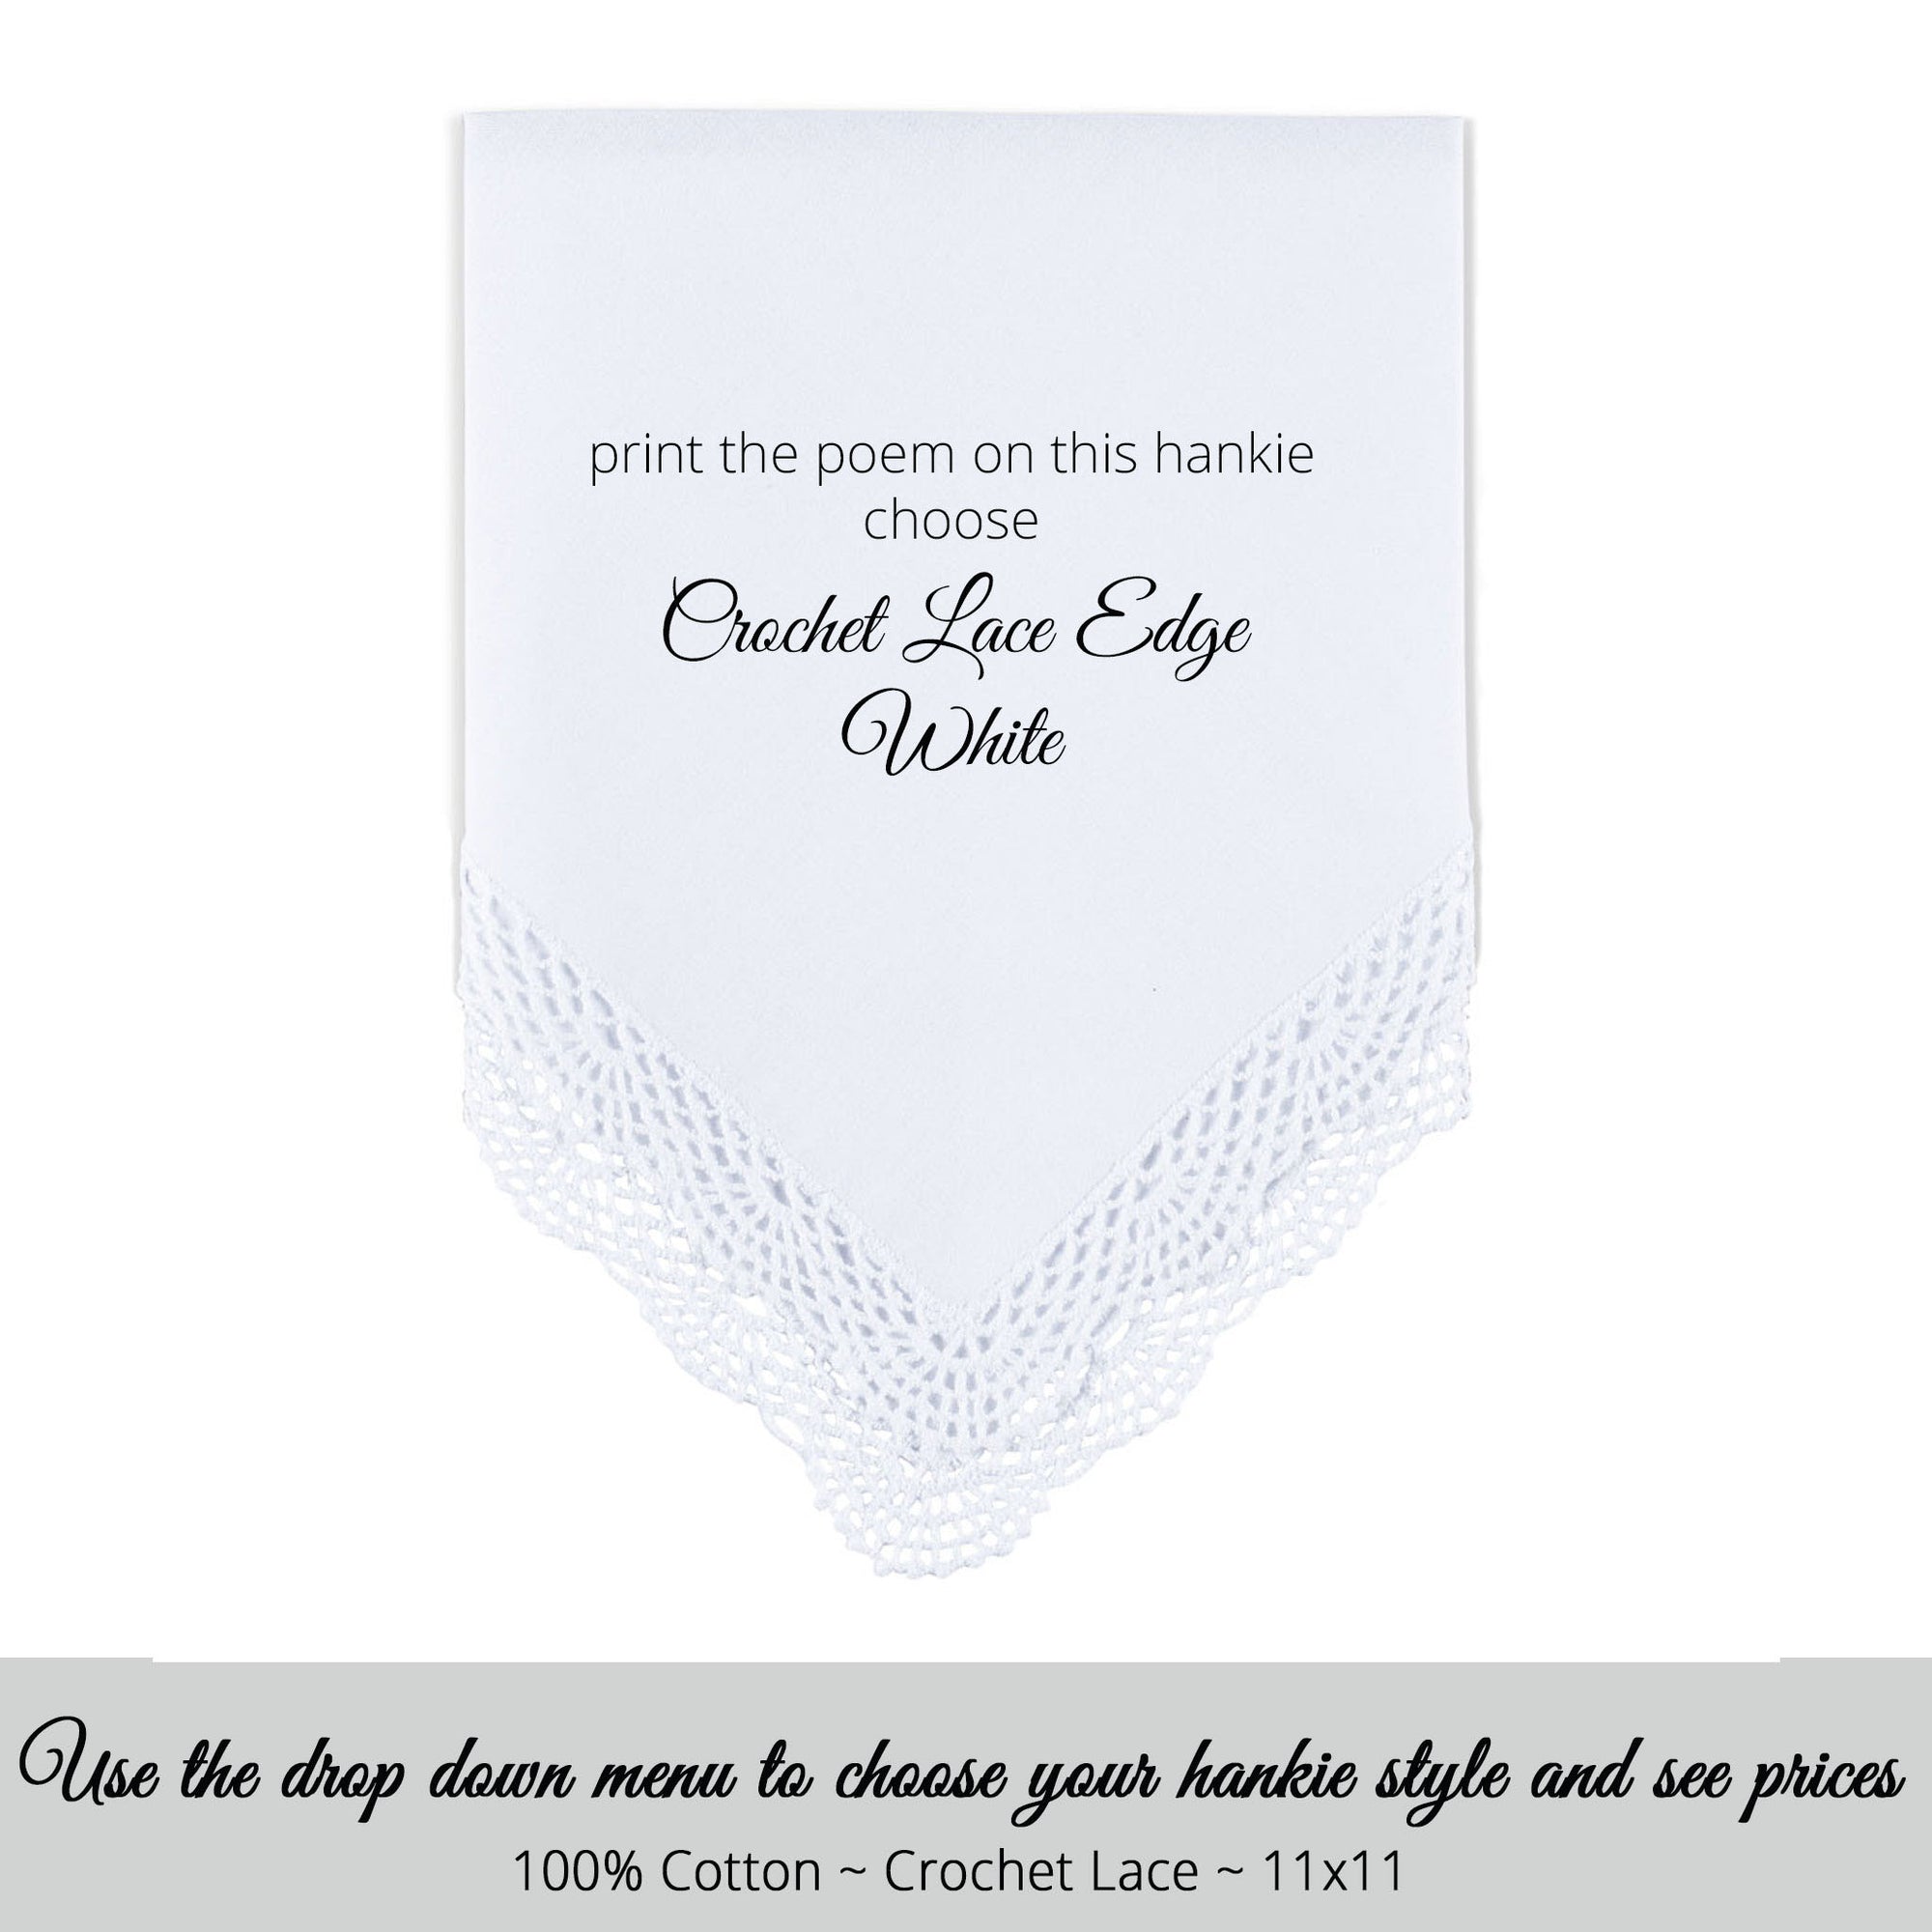 Wedding handkerchief white with crochet lace edge for the parents of the bride